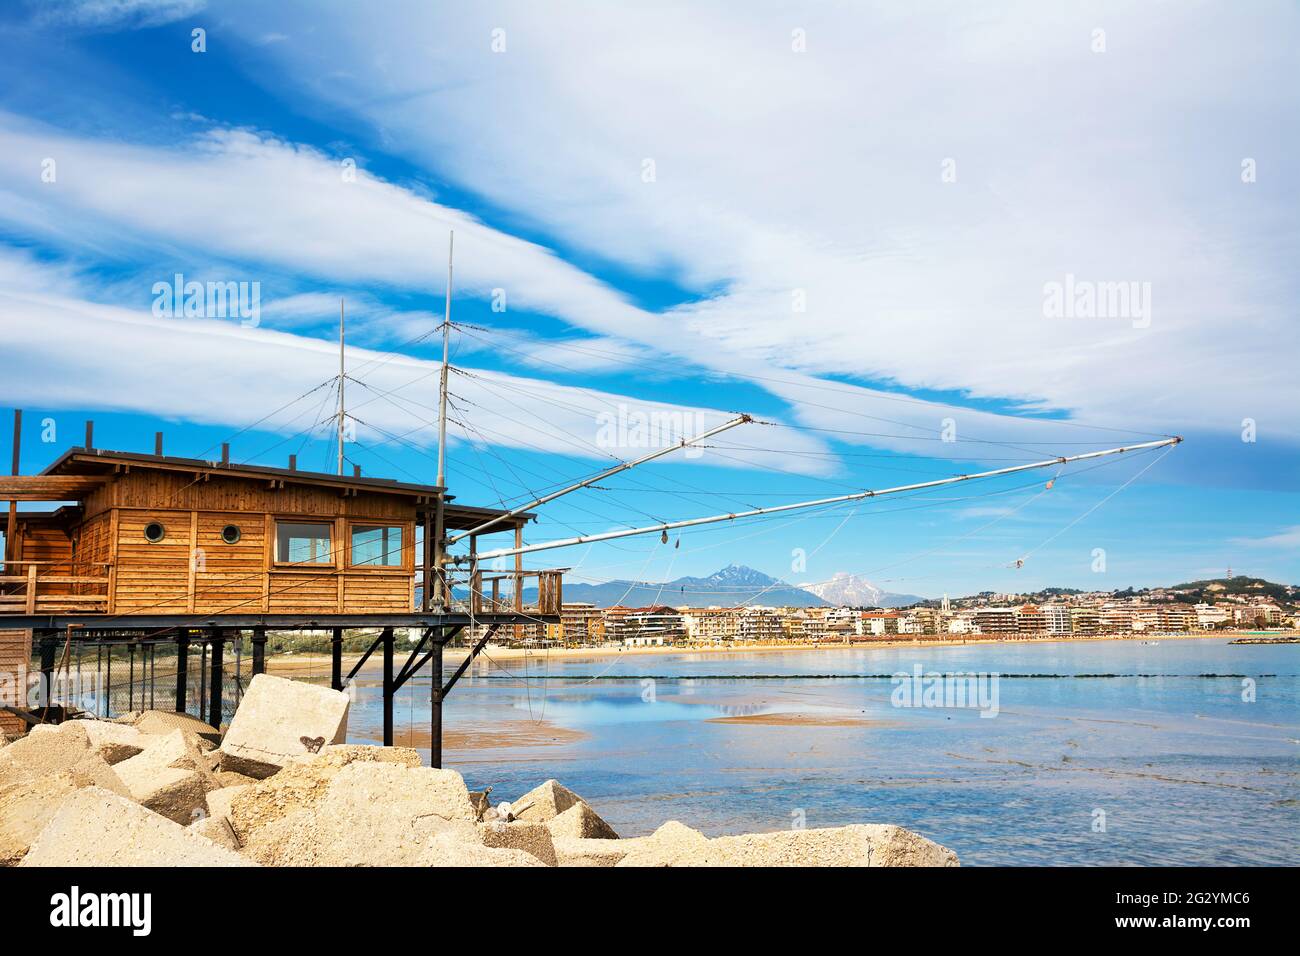 Trabucco al porto, overlooking the Pescara seafront, with the bell tower of the Divino Amore church and the Gran Sasso mountain Stock Photo